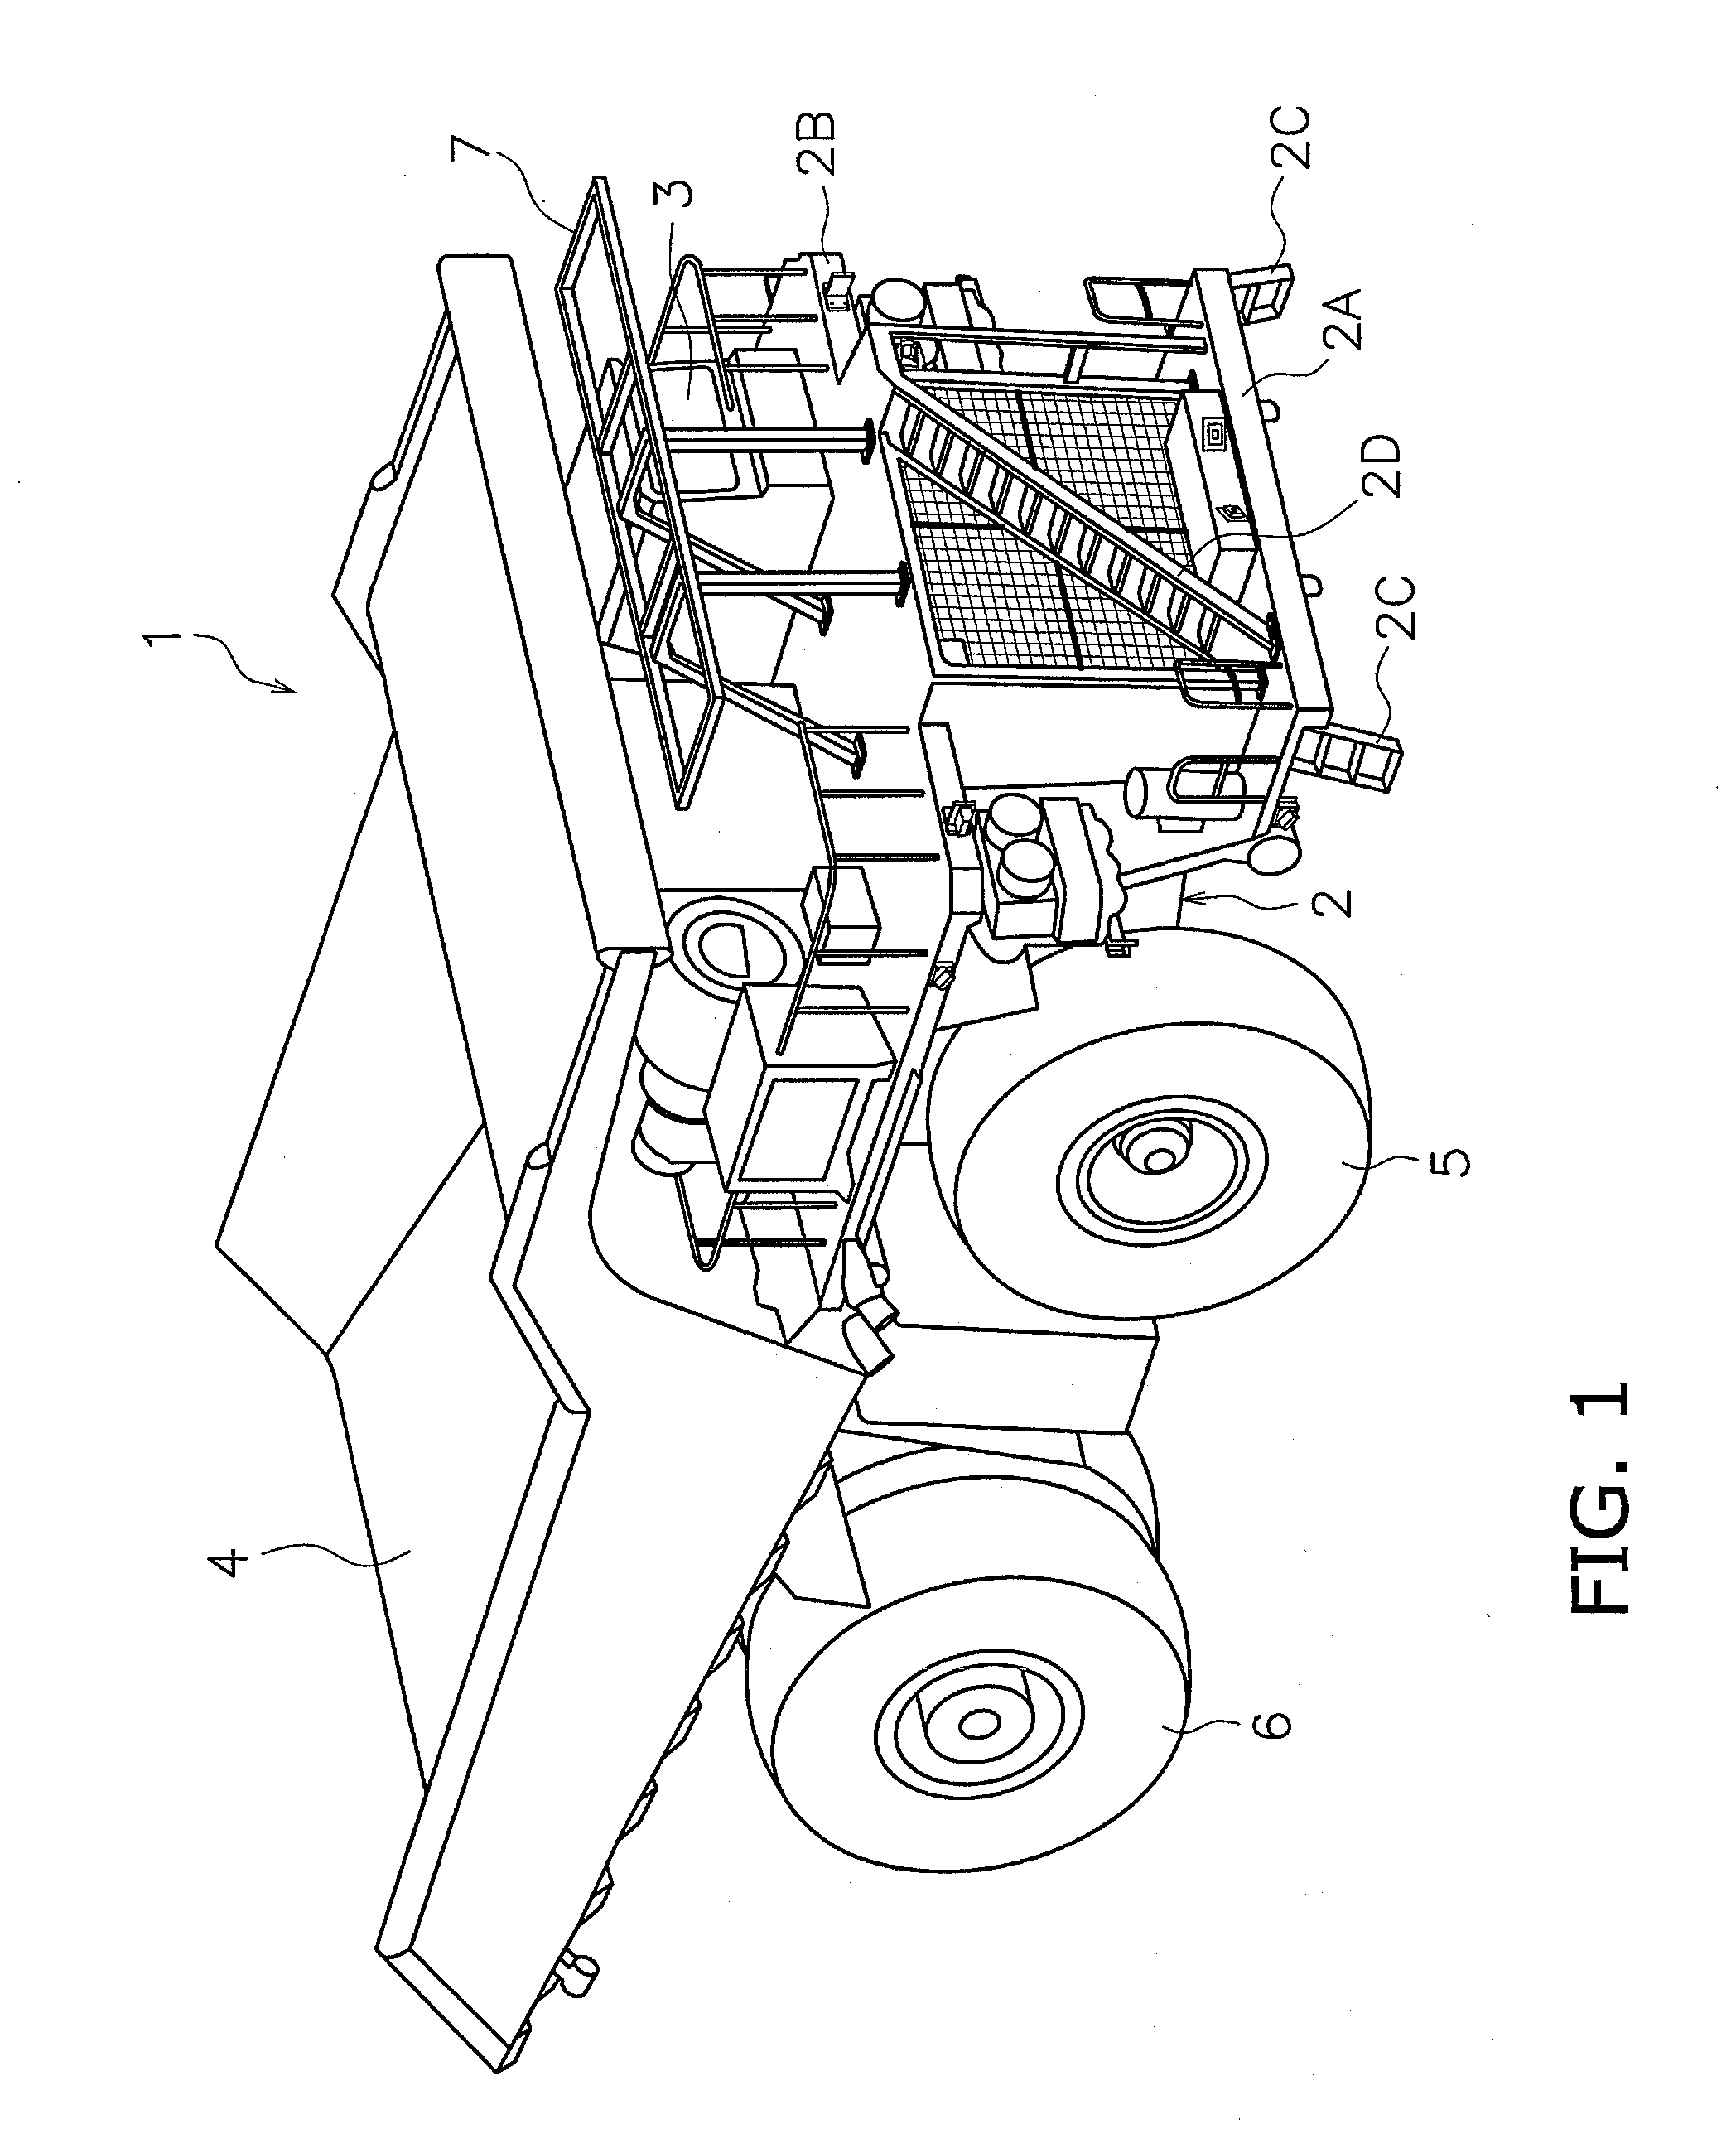 Perimeter monitoring device for work vehicle